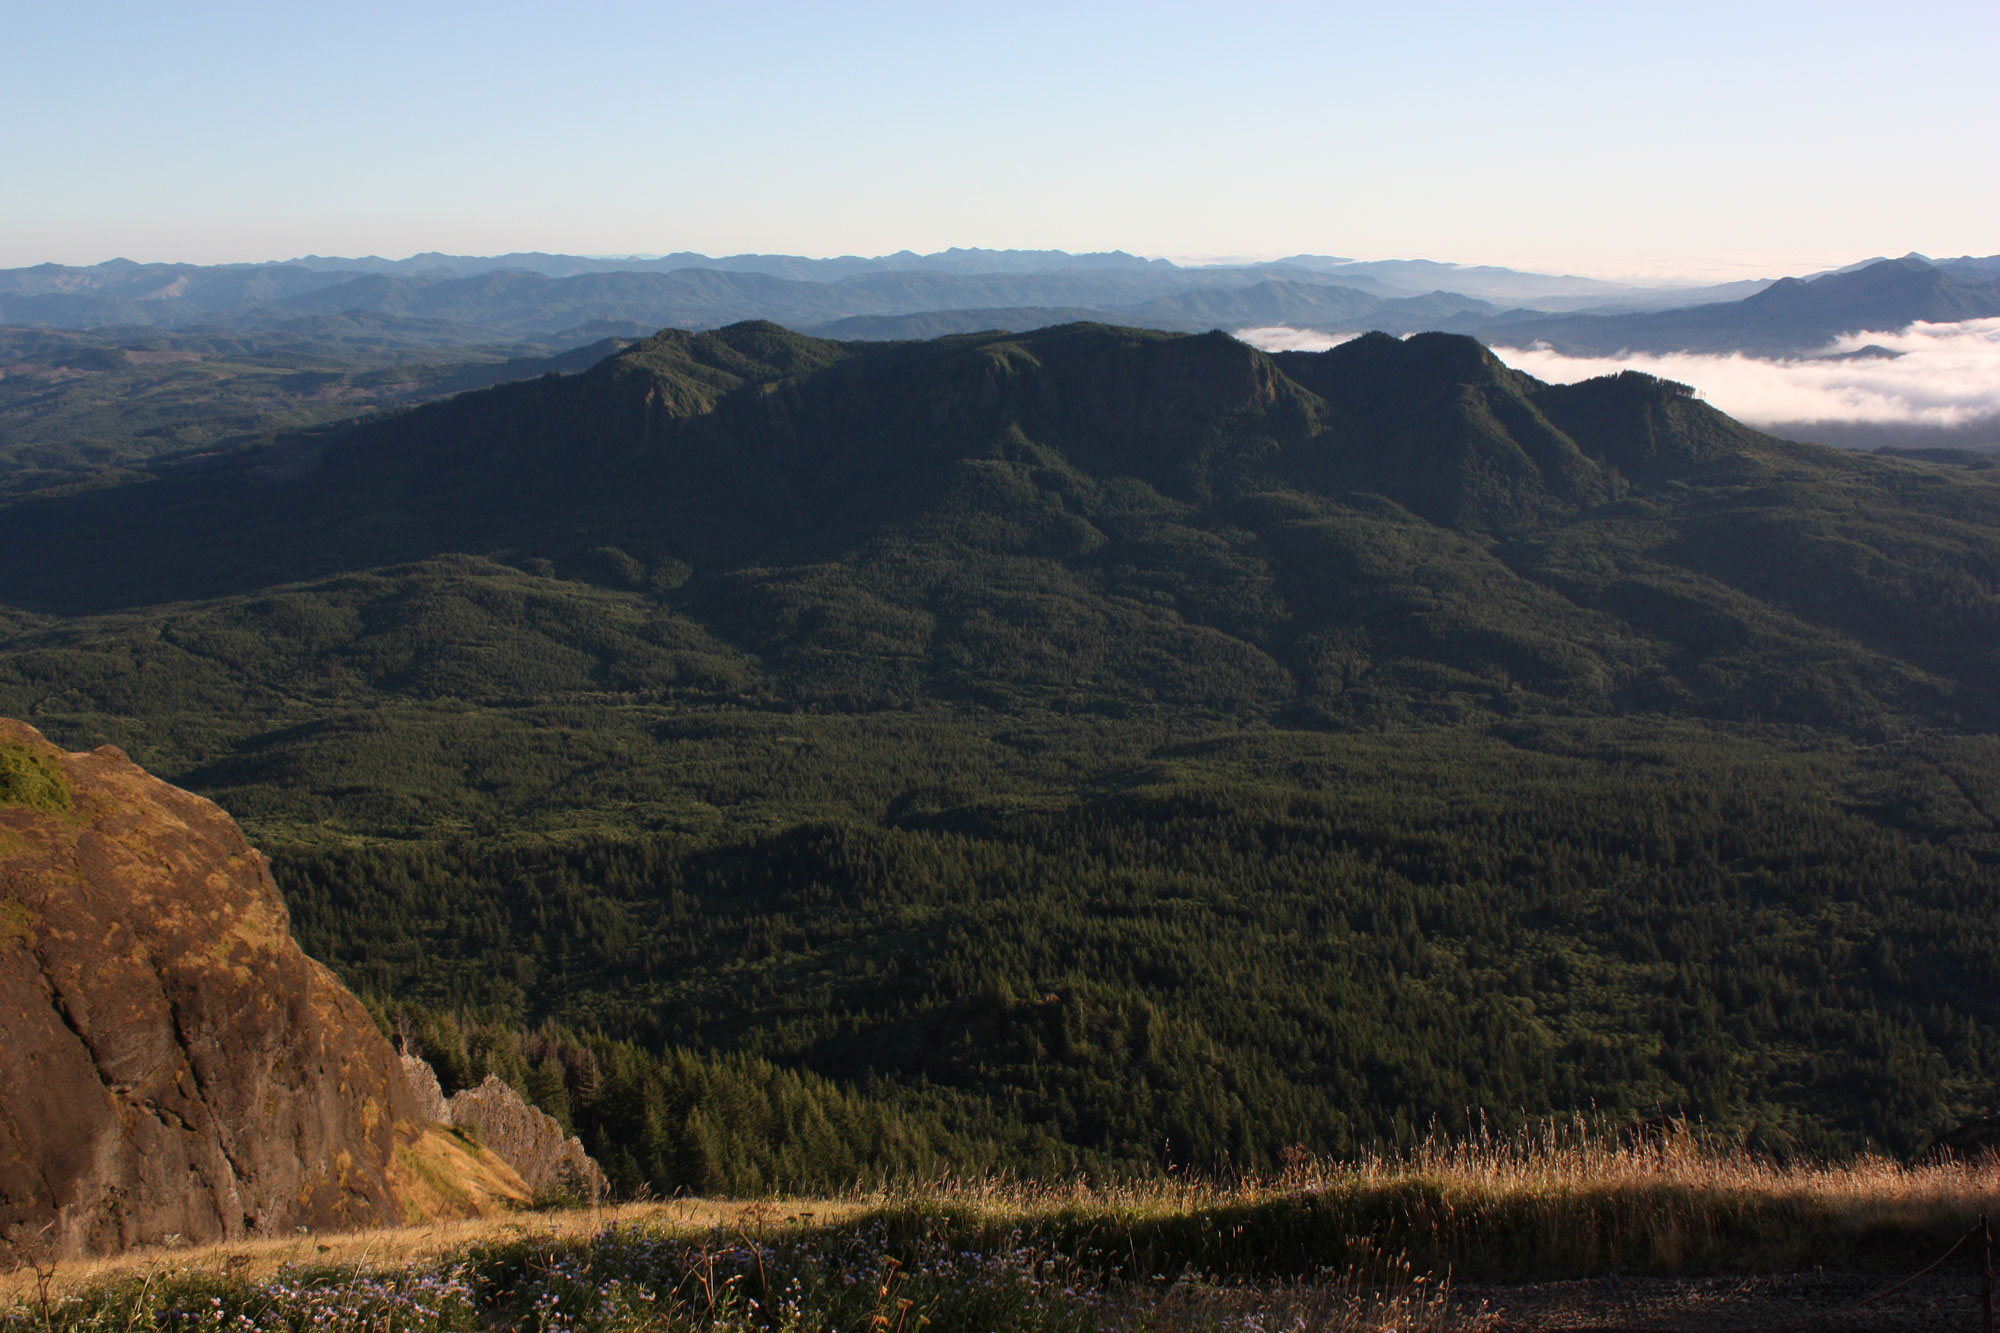 Photo of the north Coast Range in Oregon. The image shows parallel ridges of mountains covered with green vegetation.